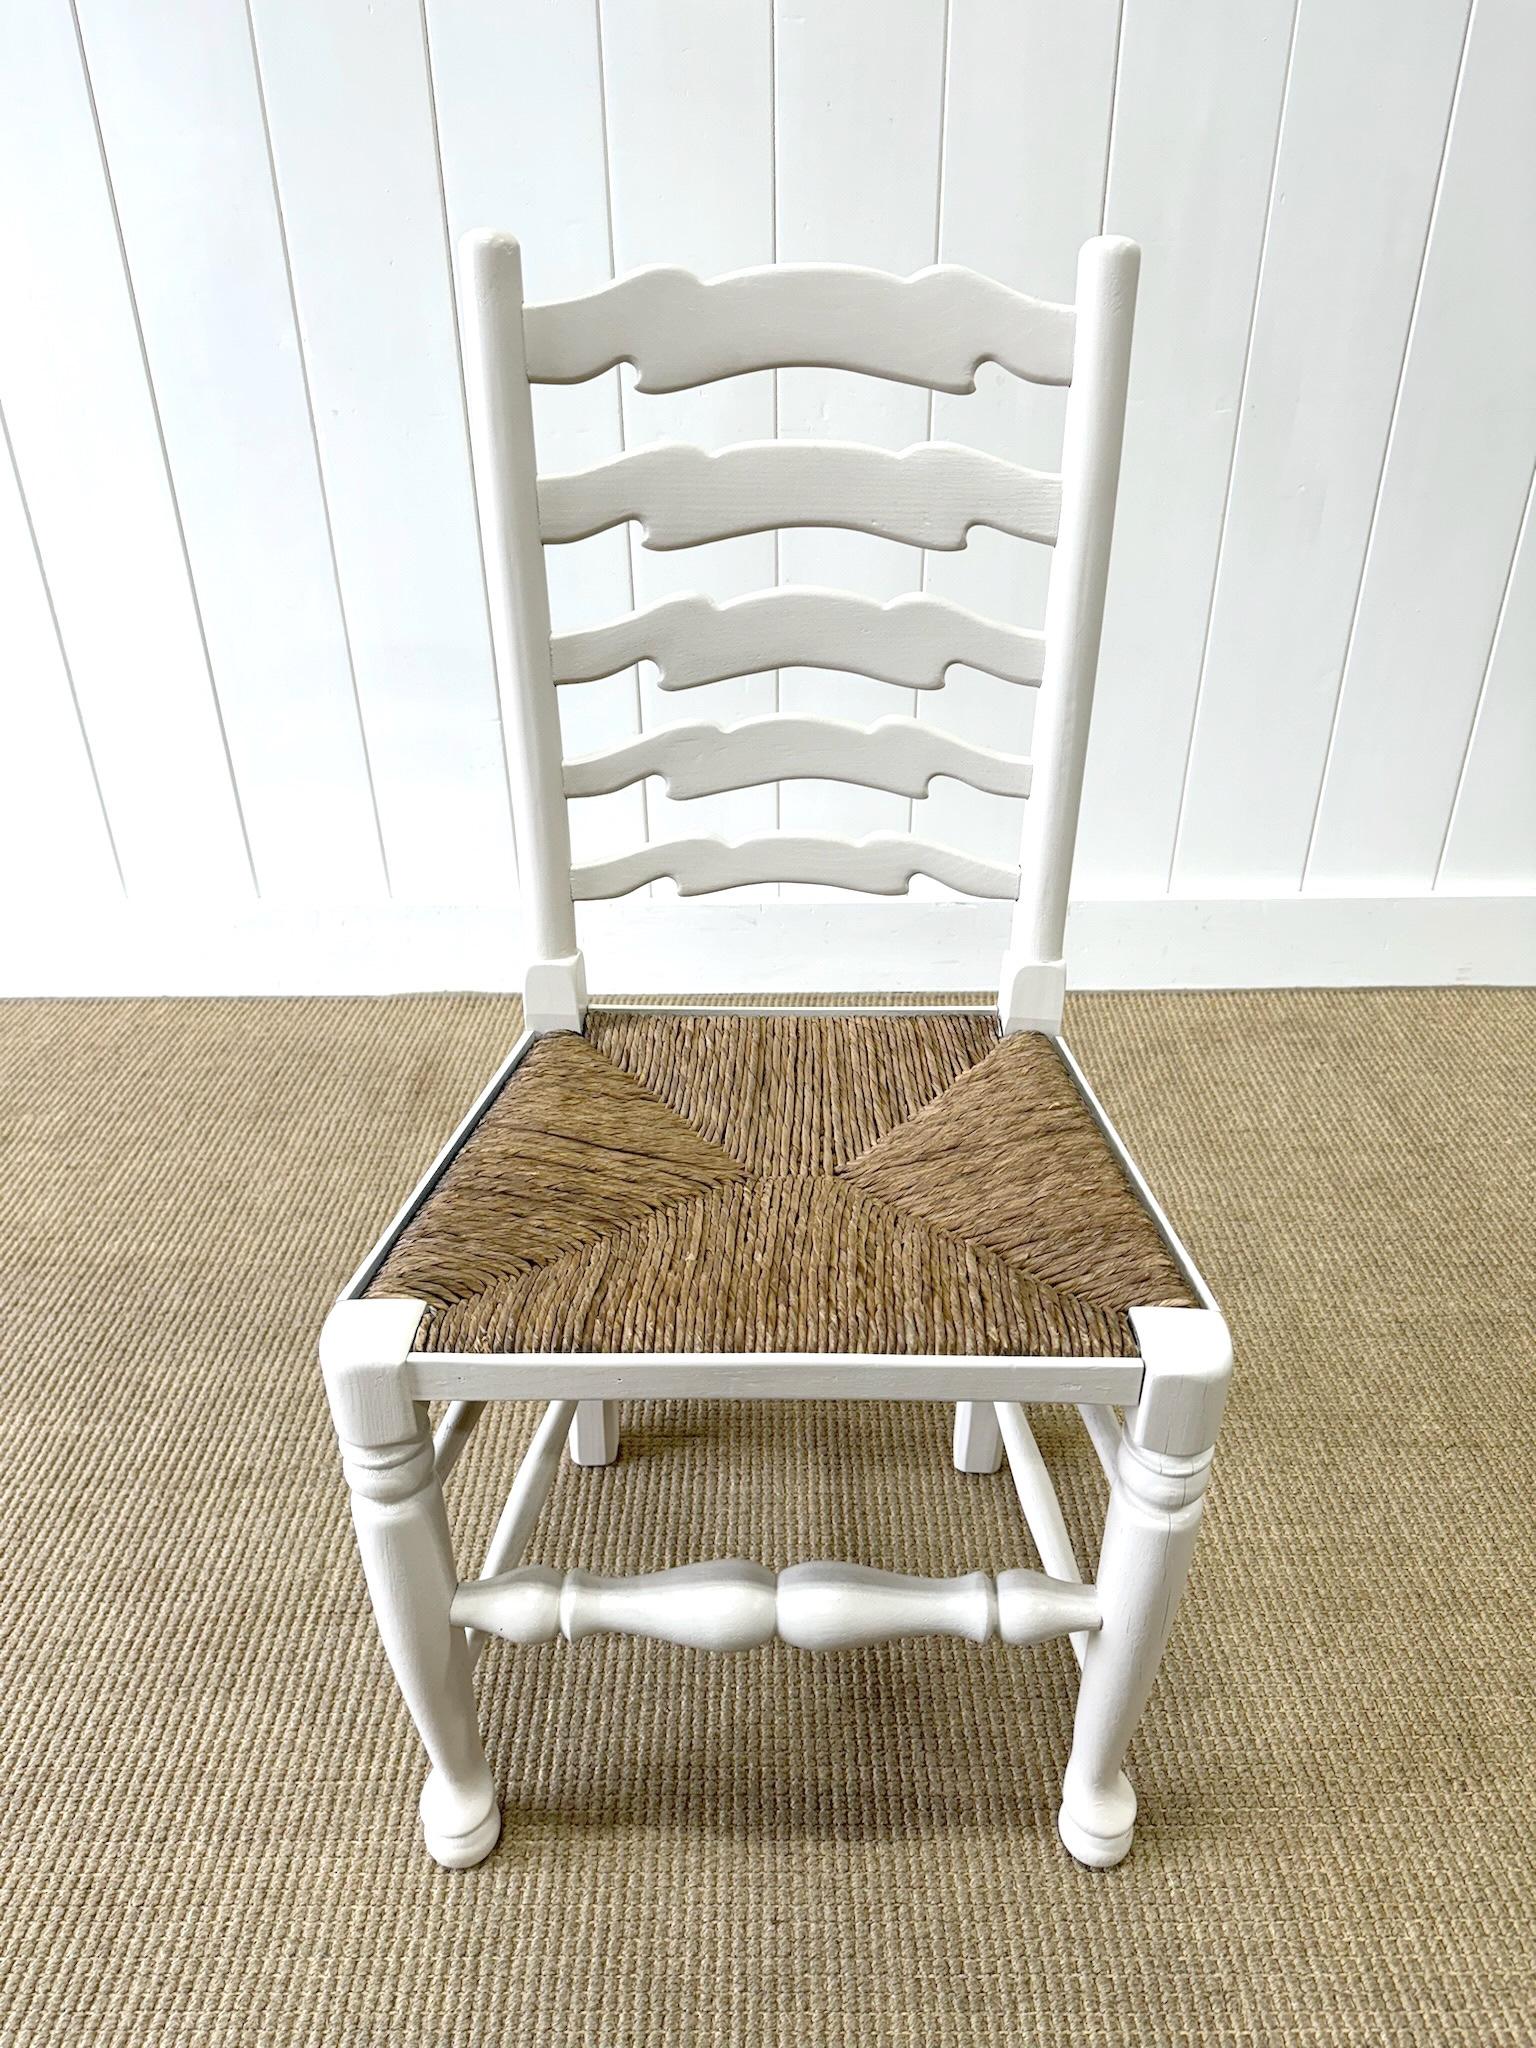 A Set of 4 Ladderback Rush Seat Chairs Painted White For Sale 1